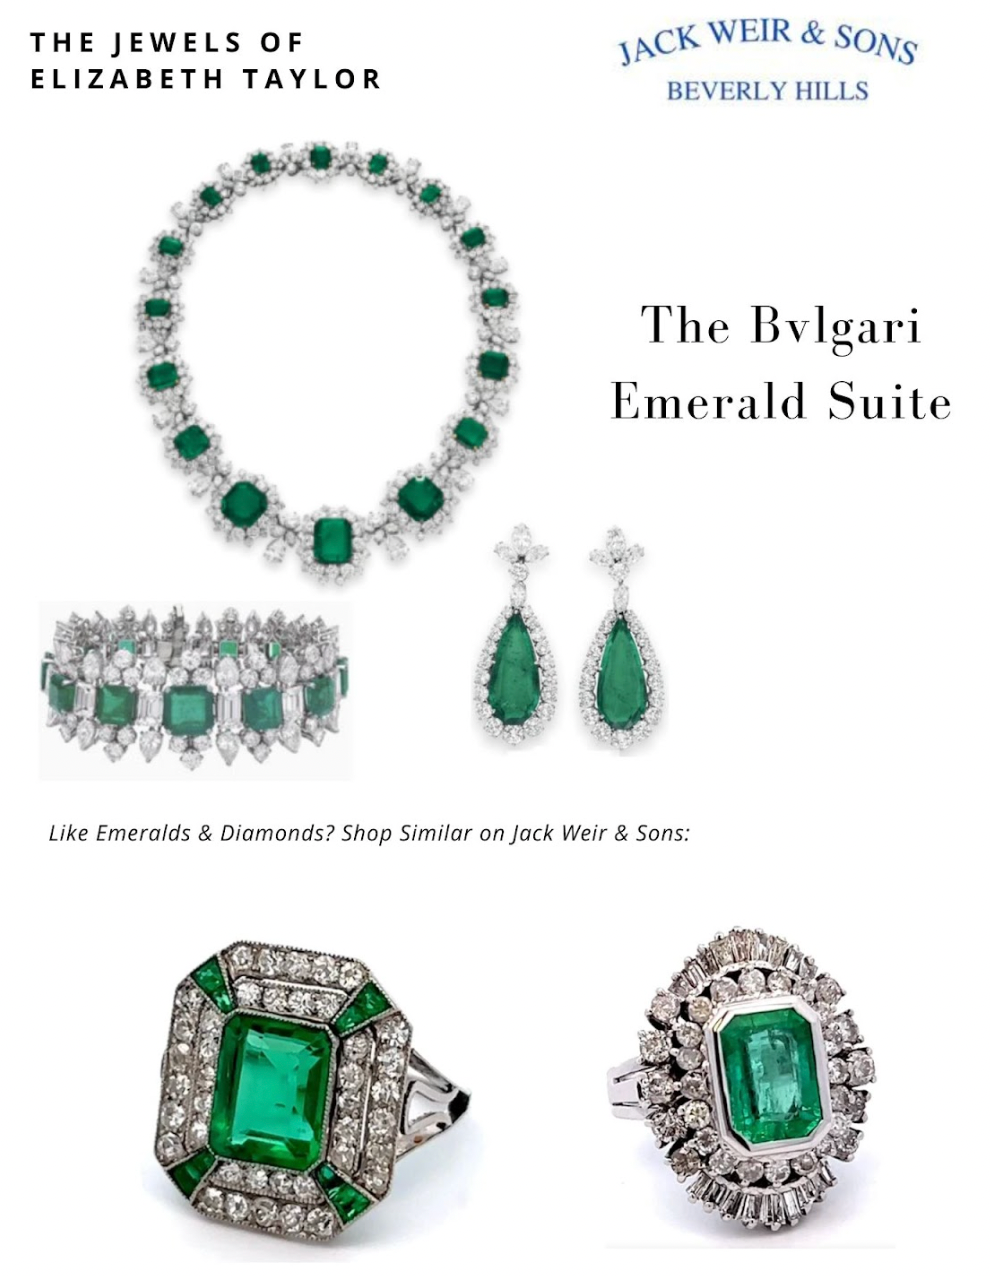 Vertical compilation on a white background featuring the iconic Bulgari Emerald Suite at the top, followed by two diamond and emerald rings that evoke a similar feeling below it.